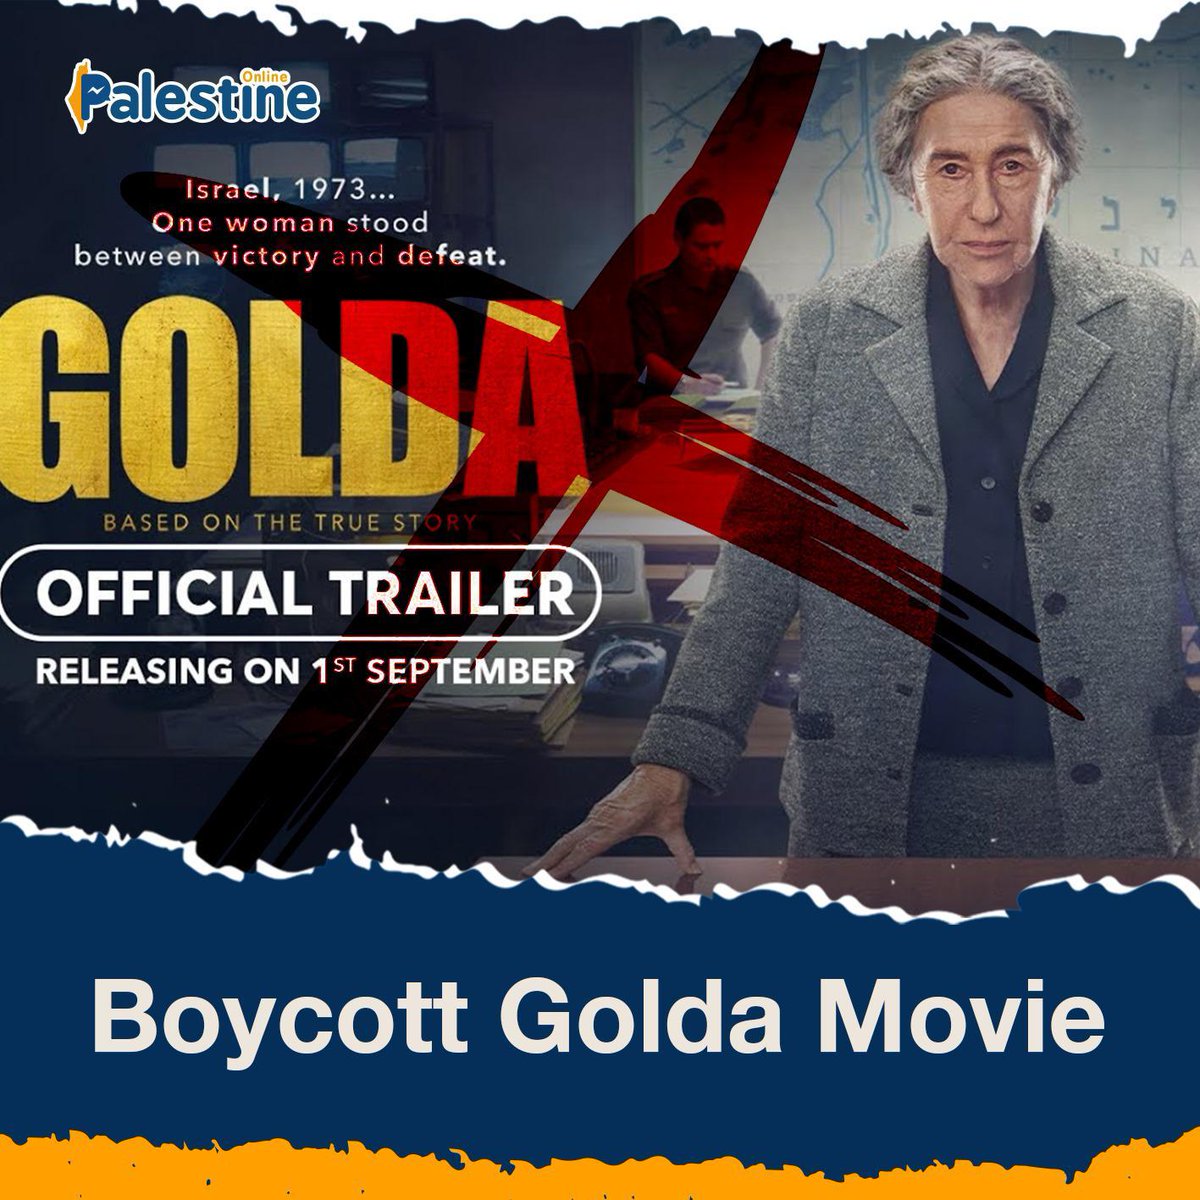 Because voices make a difference, kindly sign this petition urging everyone to boycott the Golda movie, which celebrates the racist history of Golda Meir, the former PM of Israel. #BoycottGolda The link: chng.it/rSWvr6ww